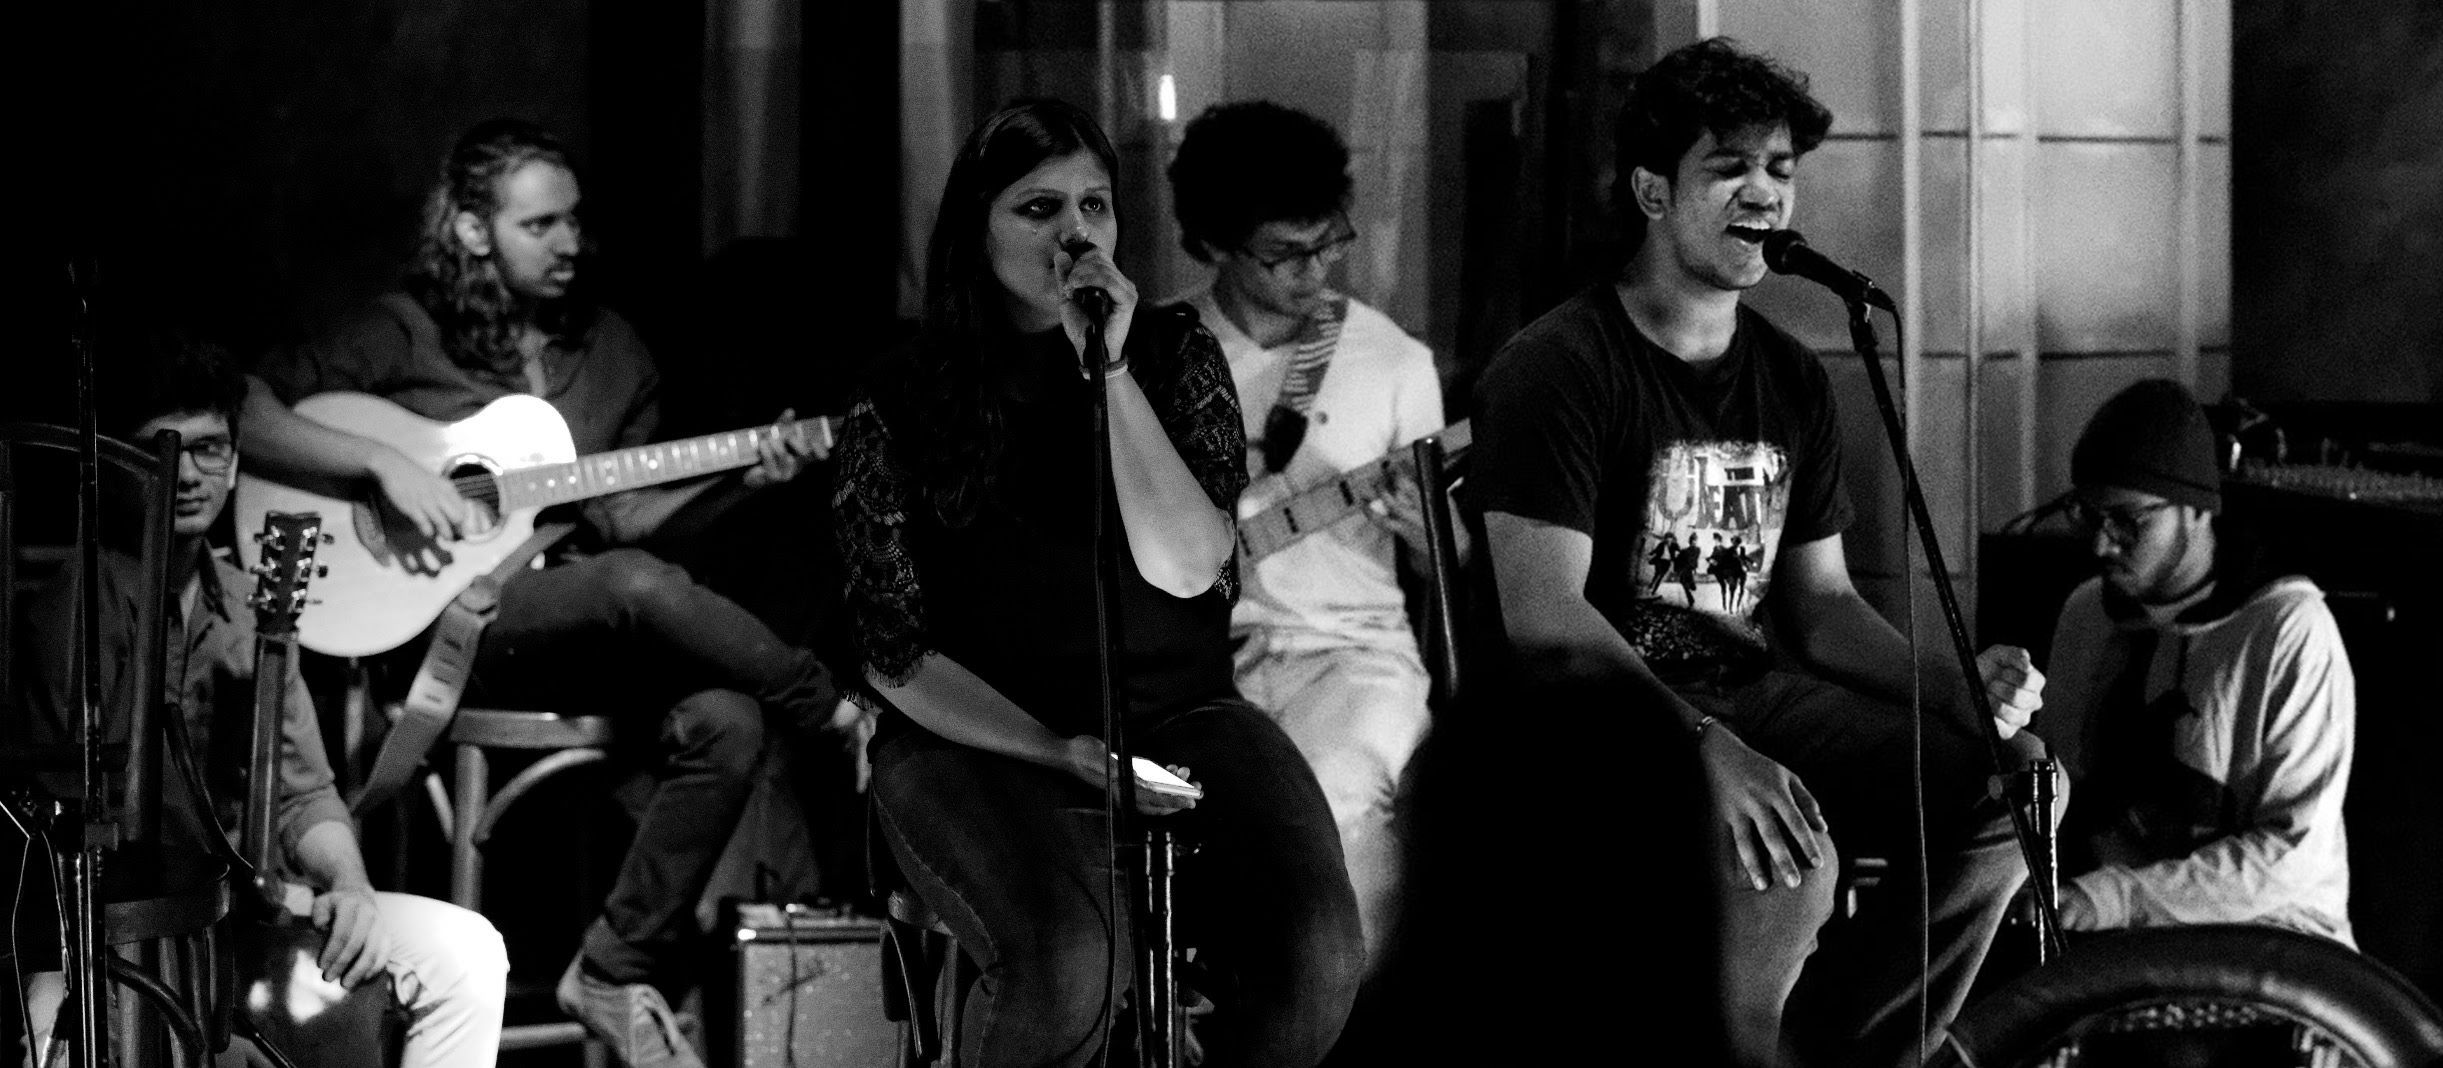 This is a black and white image of the band Blue Moss. From left to right, there is Ayush on Drums, Nirbhay on the Guitar, Shreya on vocals, Imaad on the bass, Vineet on vocals, and Rishi (me) on the synthesizer.